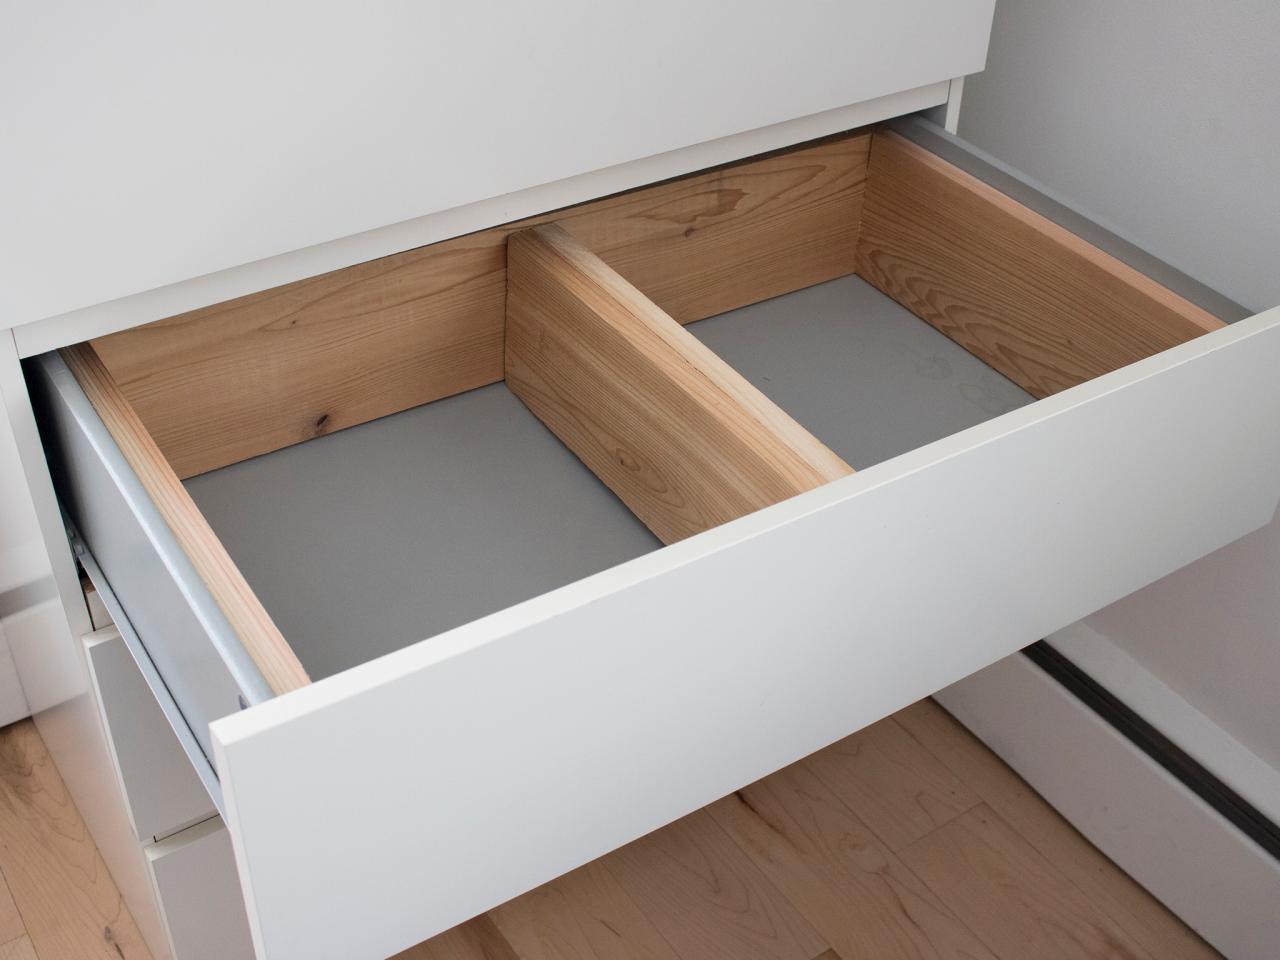 How to Build Cedar Drawer Liners | how-tos | DIY